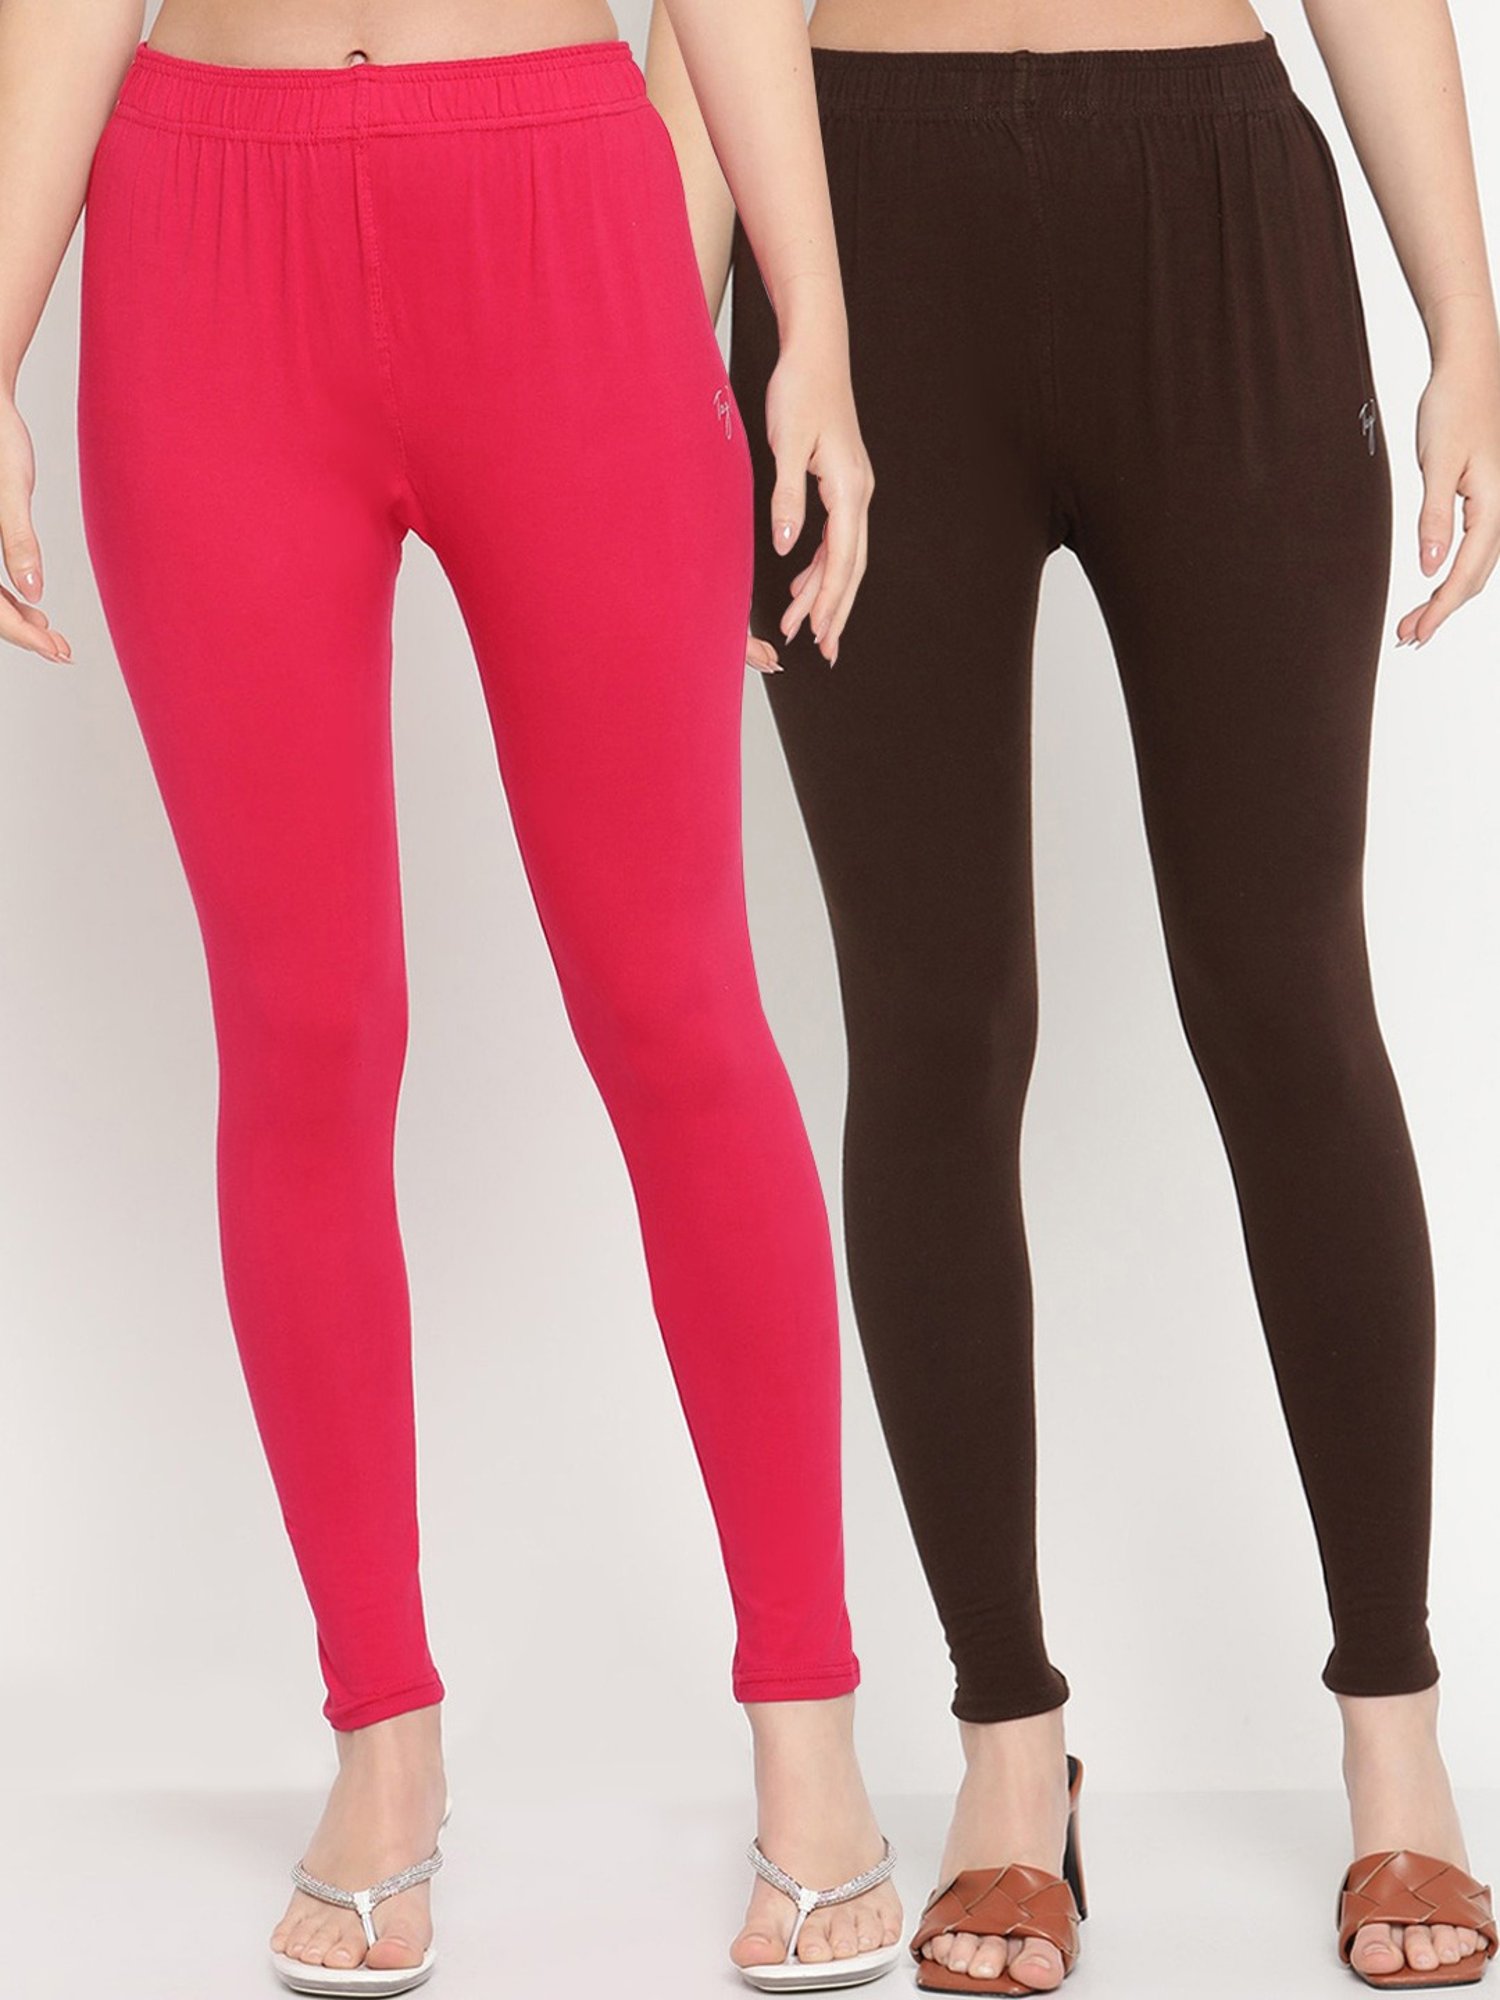 Buy Web Collection Cotton Leggings for Women Free Size Black at Amazon.in